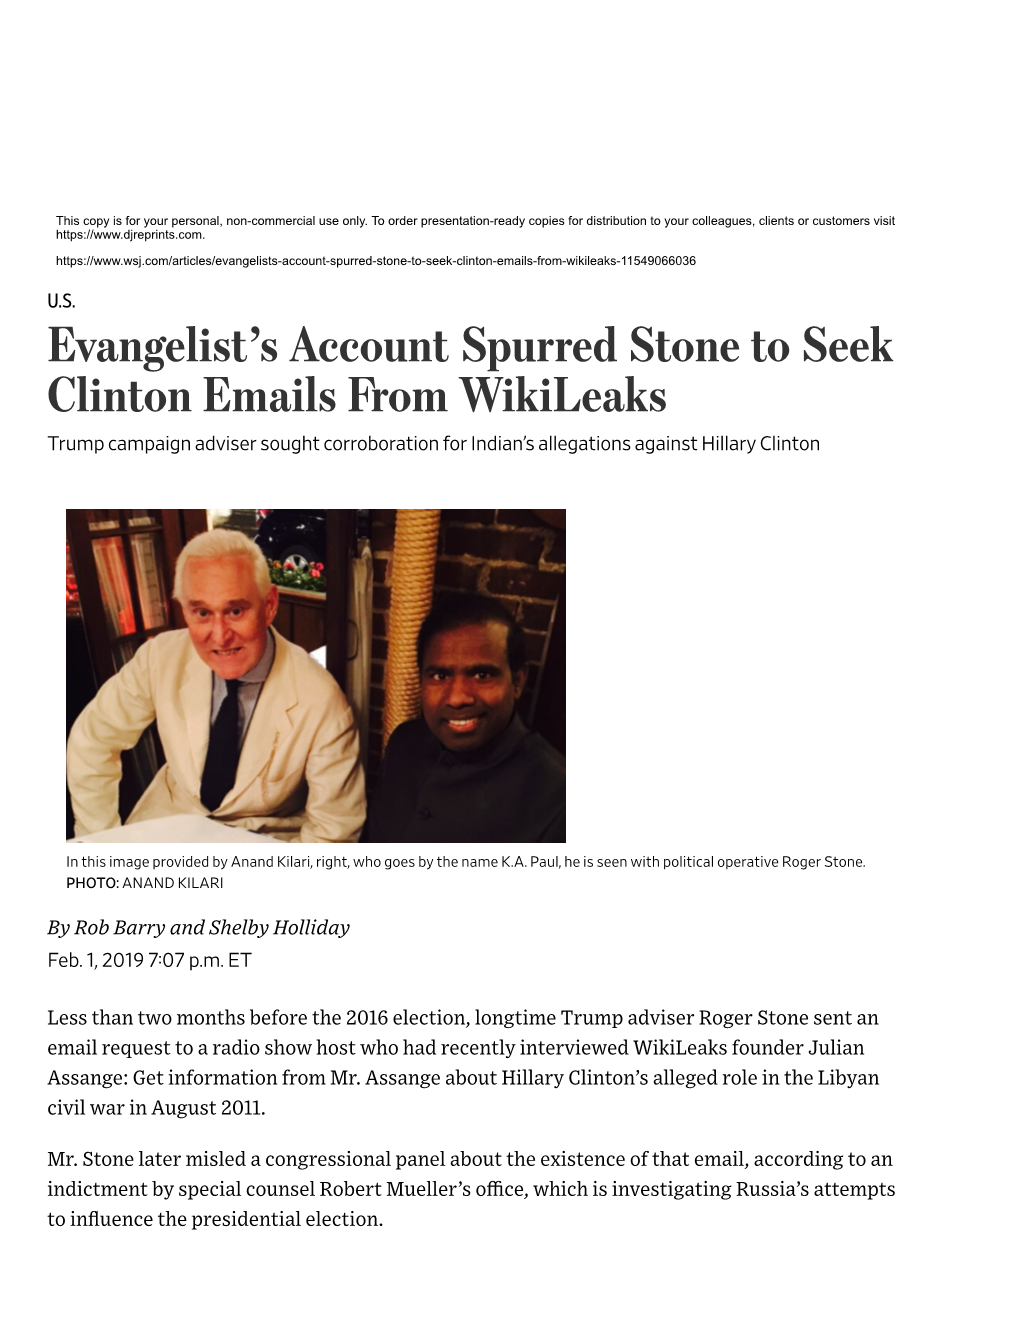 Evangelist's Account Spurred Stone to Seek Clinton Emails from Wikileaks